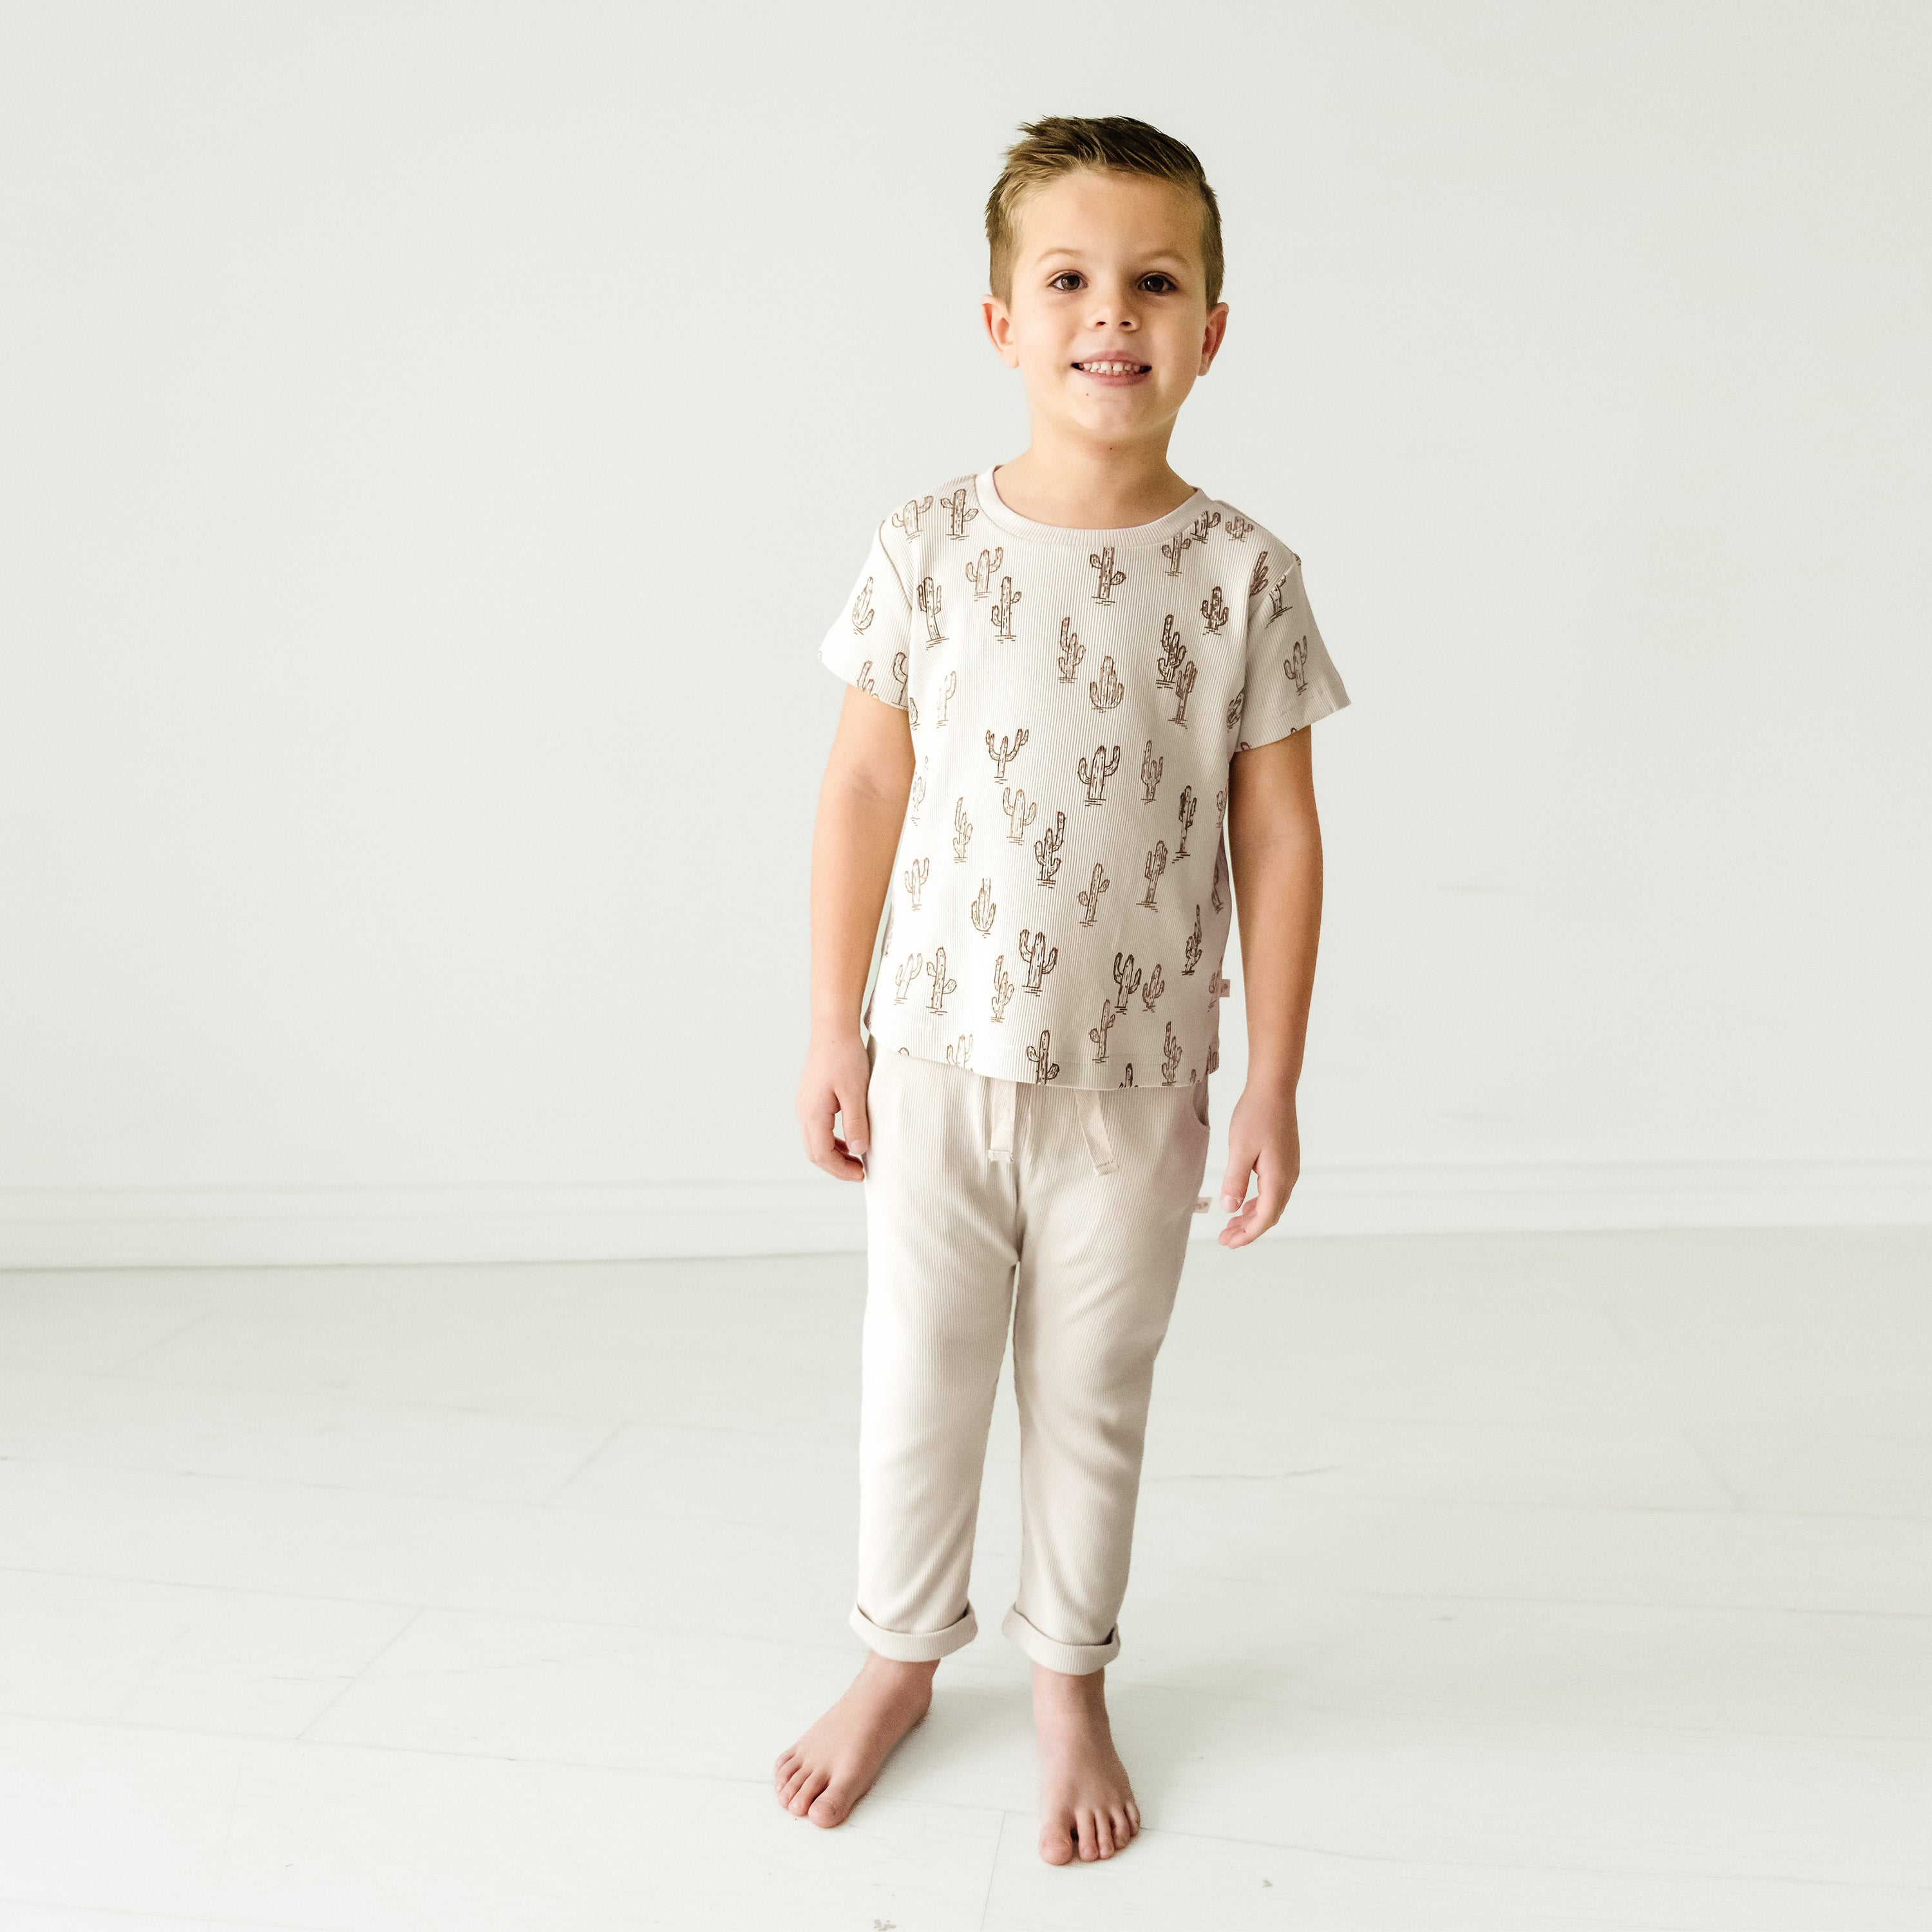 A young boy in a Makemake Organics Organic Tee & Pants Set - Cactus stands barefoot, smiling, in a plain white studio setting.